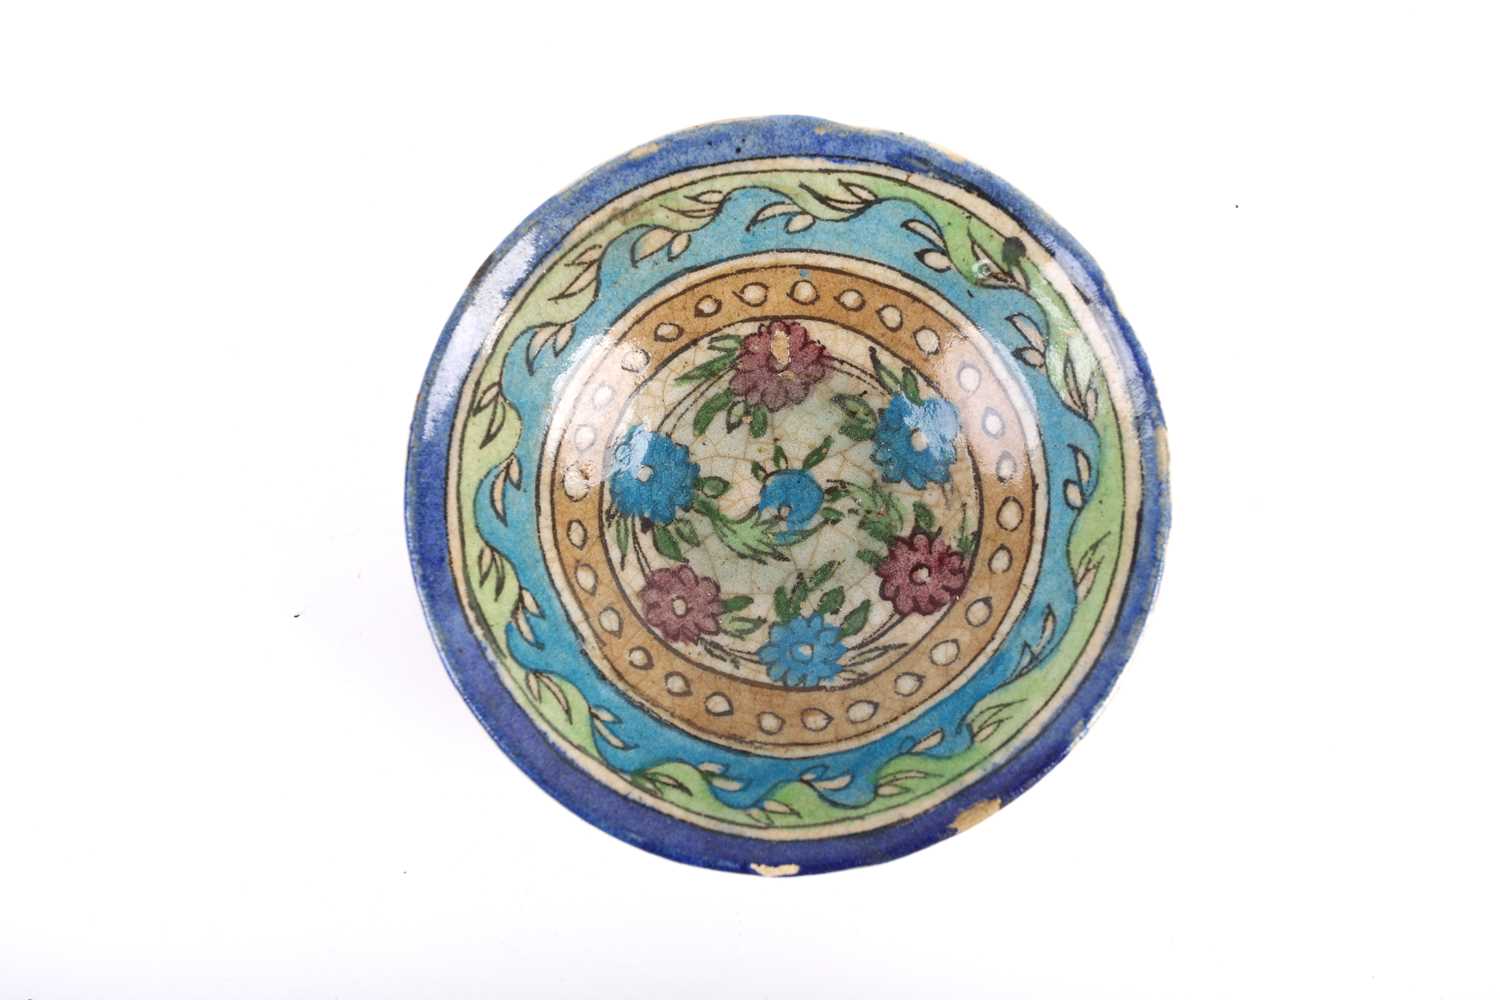 A Persian Isnik pottery bowl, Safavid/Qajar 18th century, the interior painted with flowers - Image 2 of 3